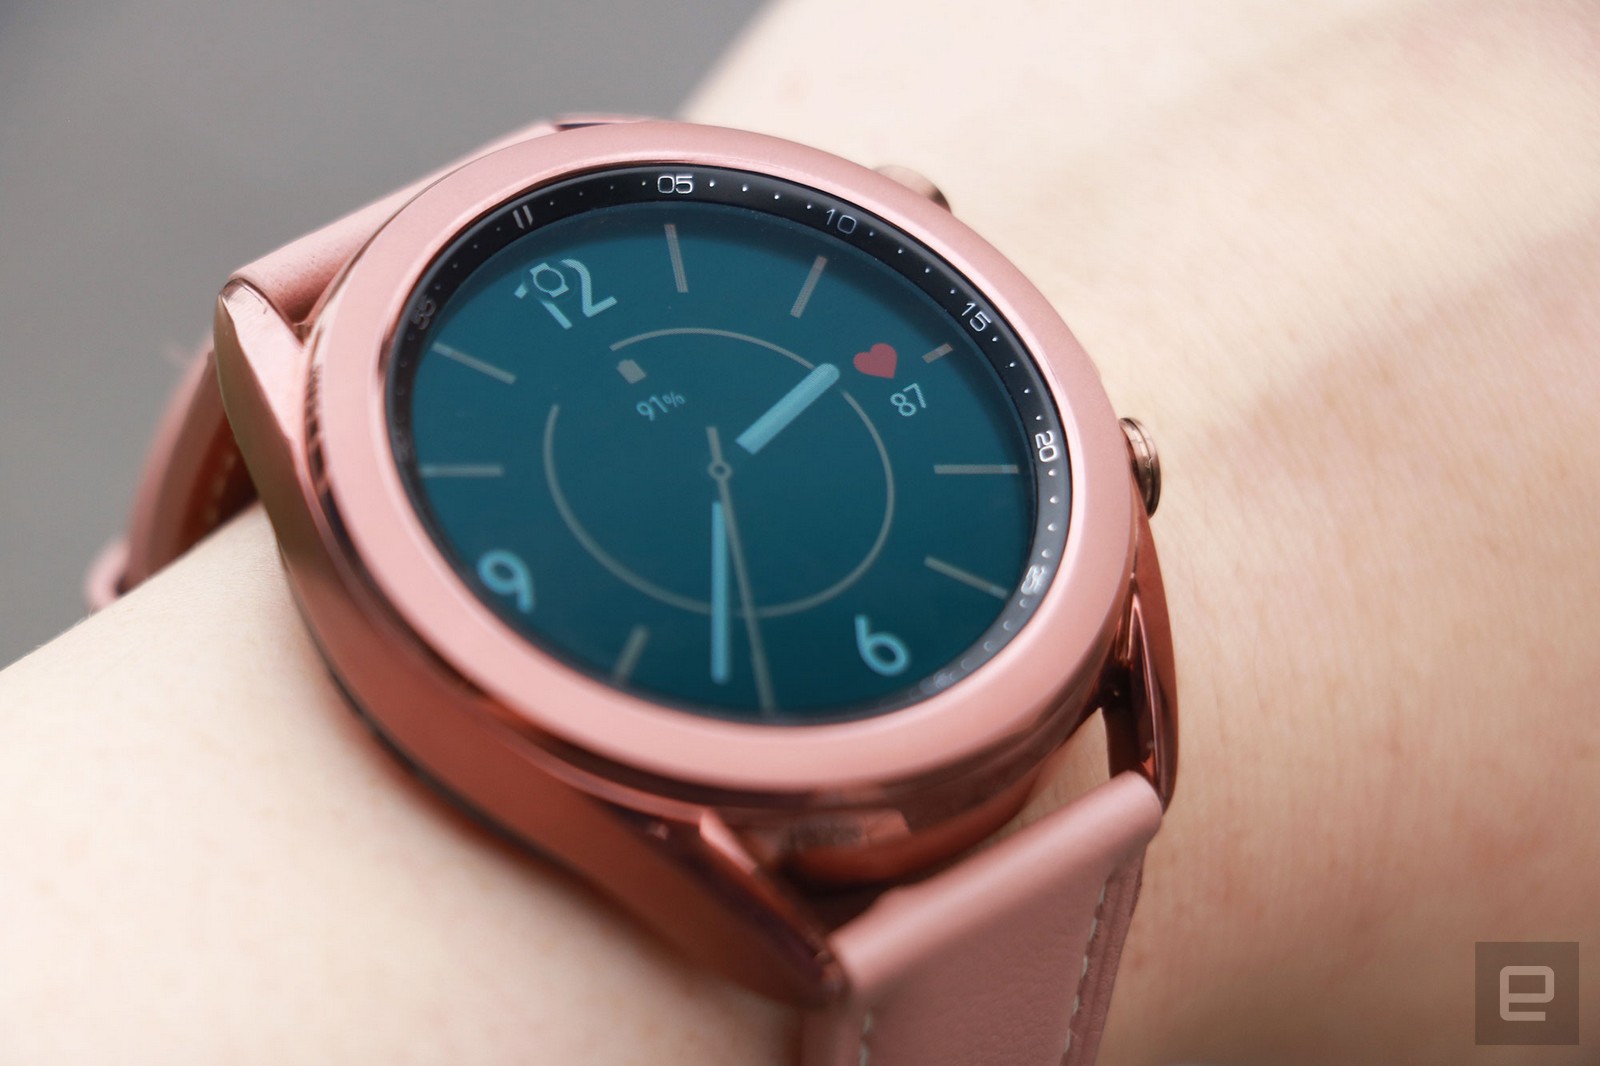 Samsung’s future smartwatch is rumored to utilize Android, now not Tizen